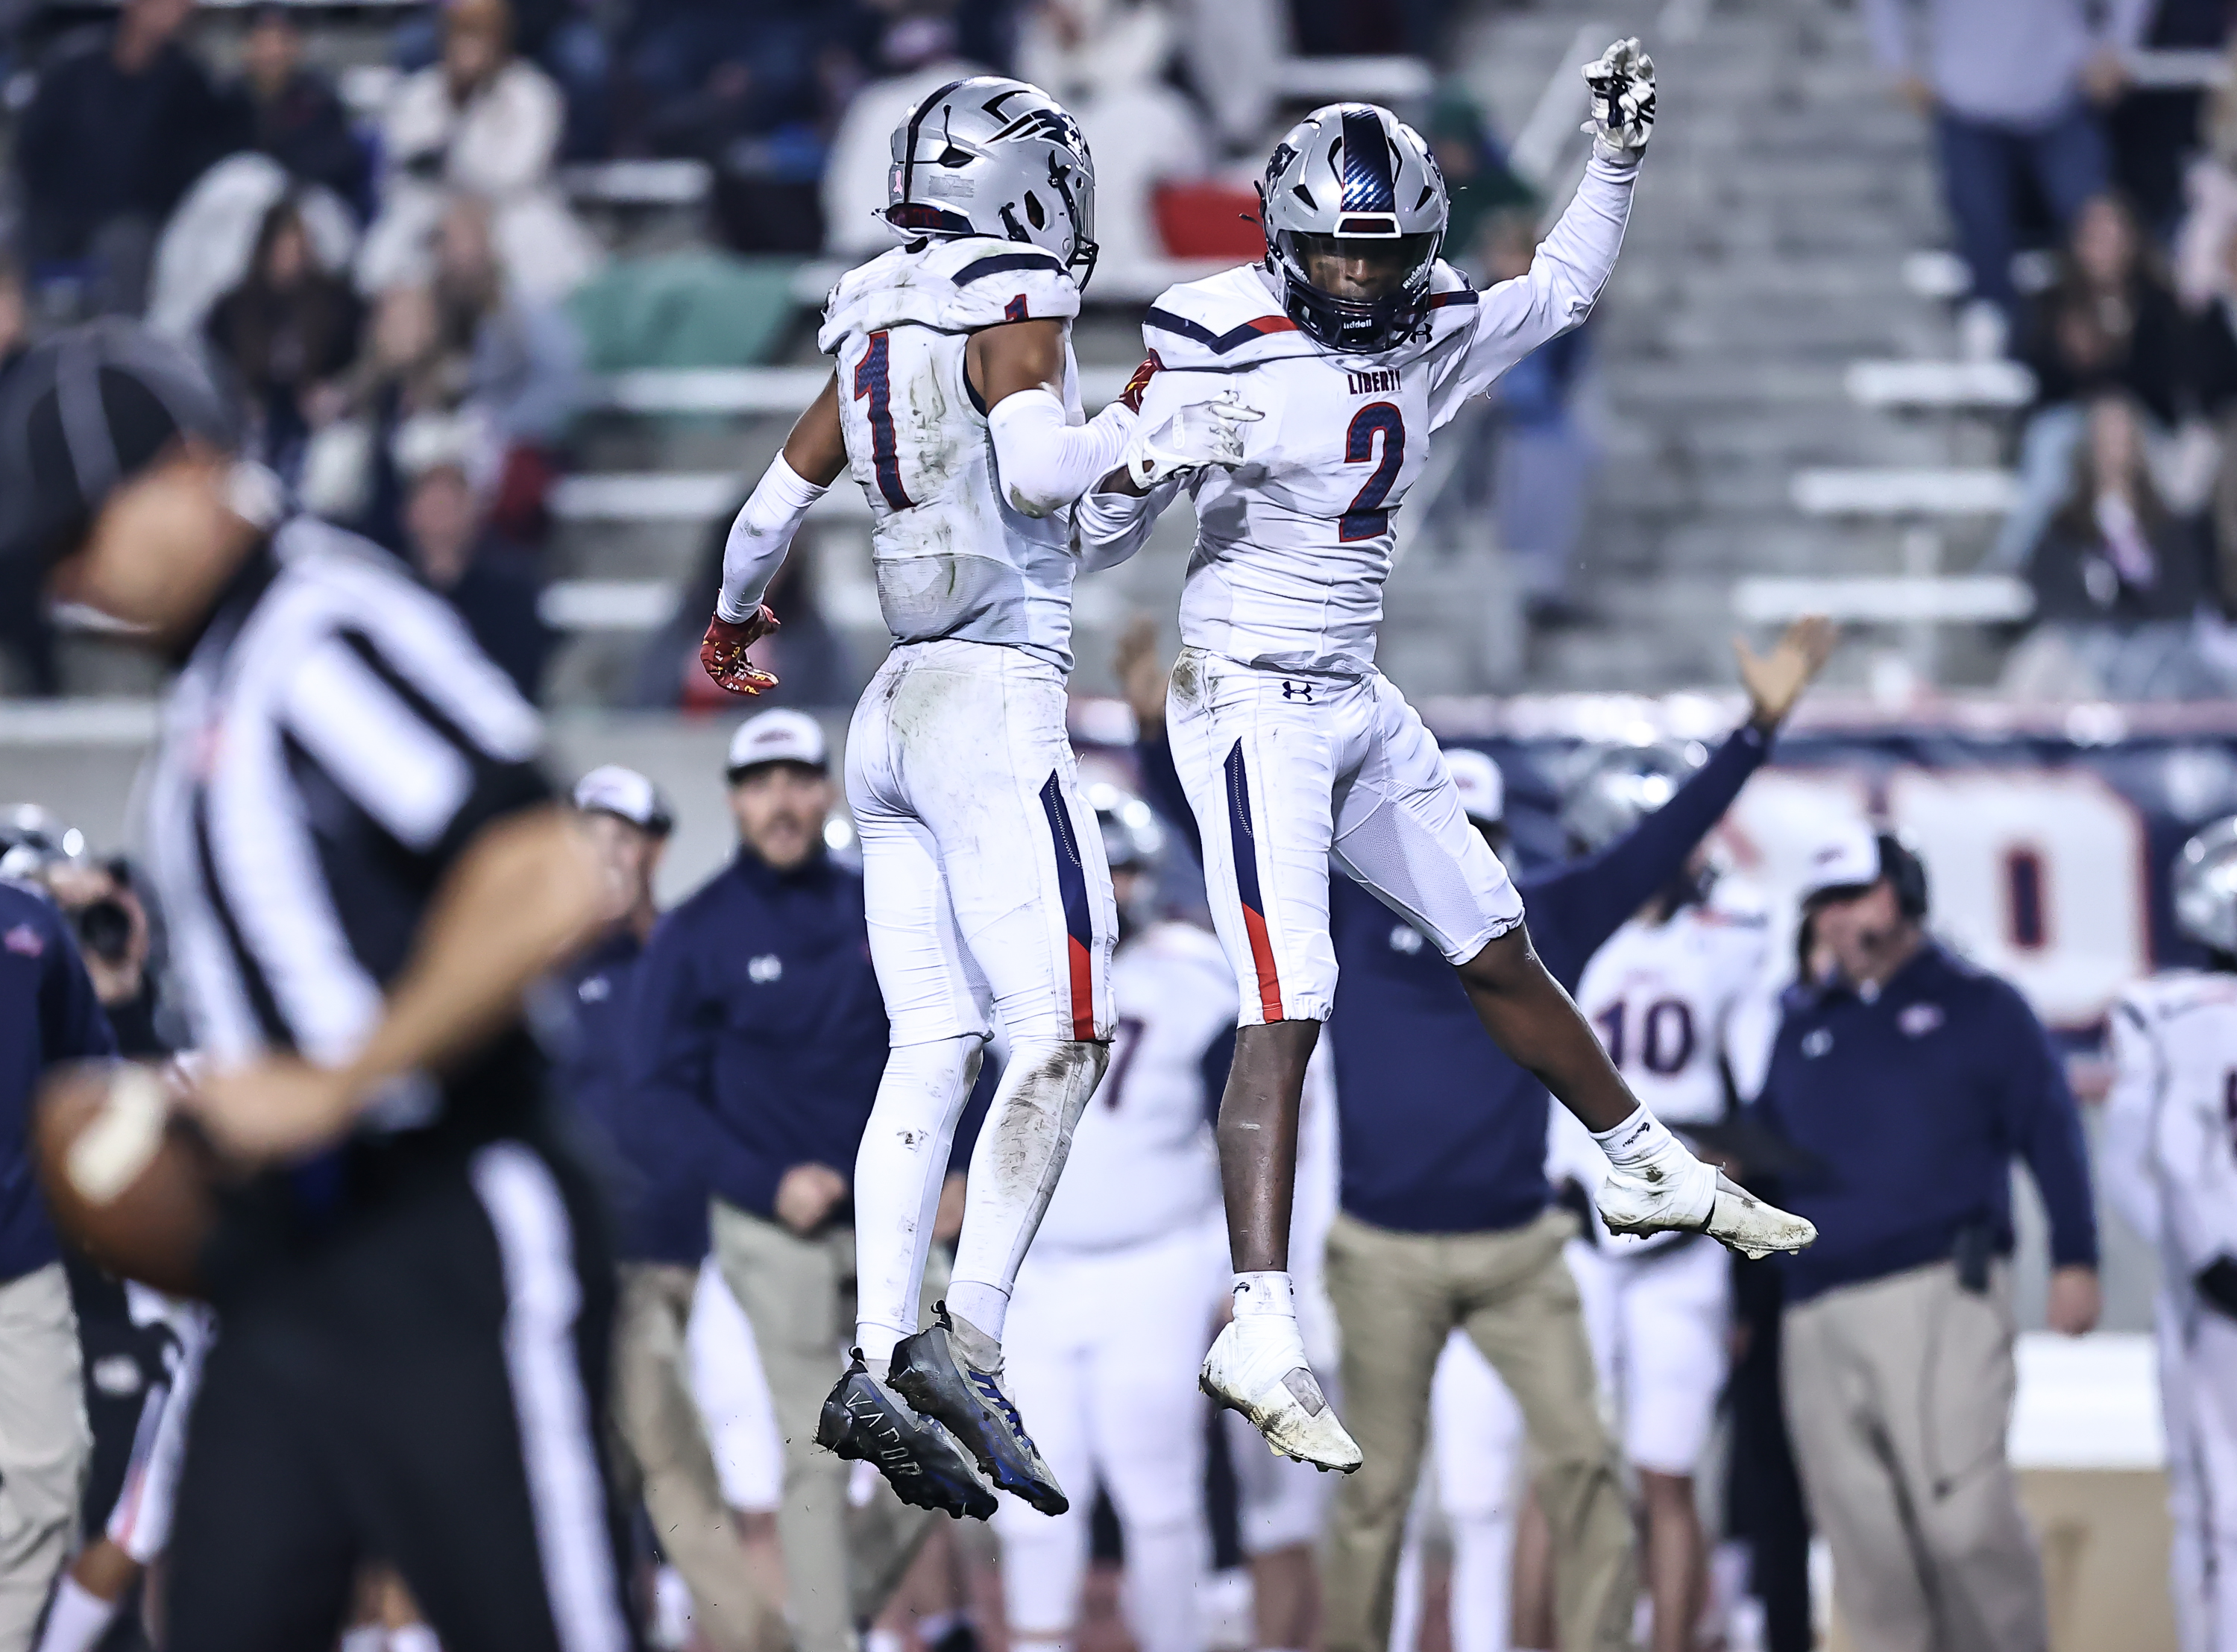 Xander Chisolm (1) and Christian Edwards (2) enjoy a Liberty moment. Photo: Bobby Medellin